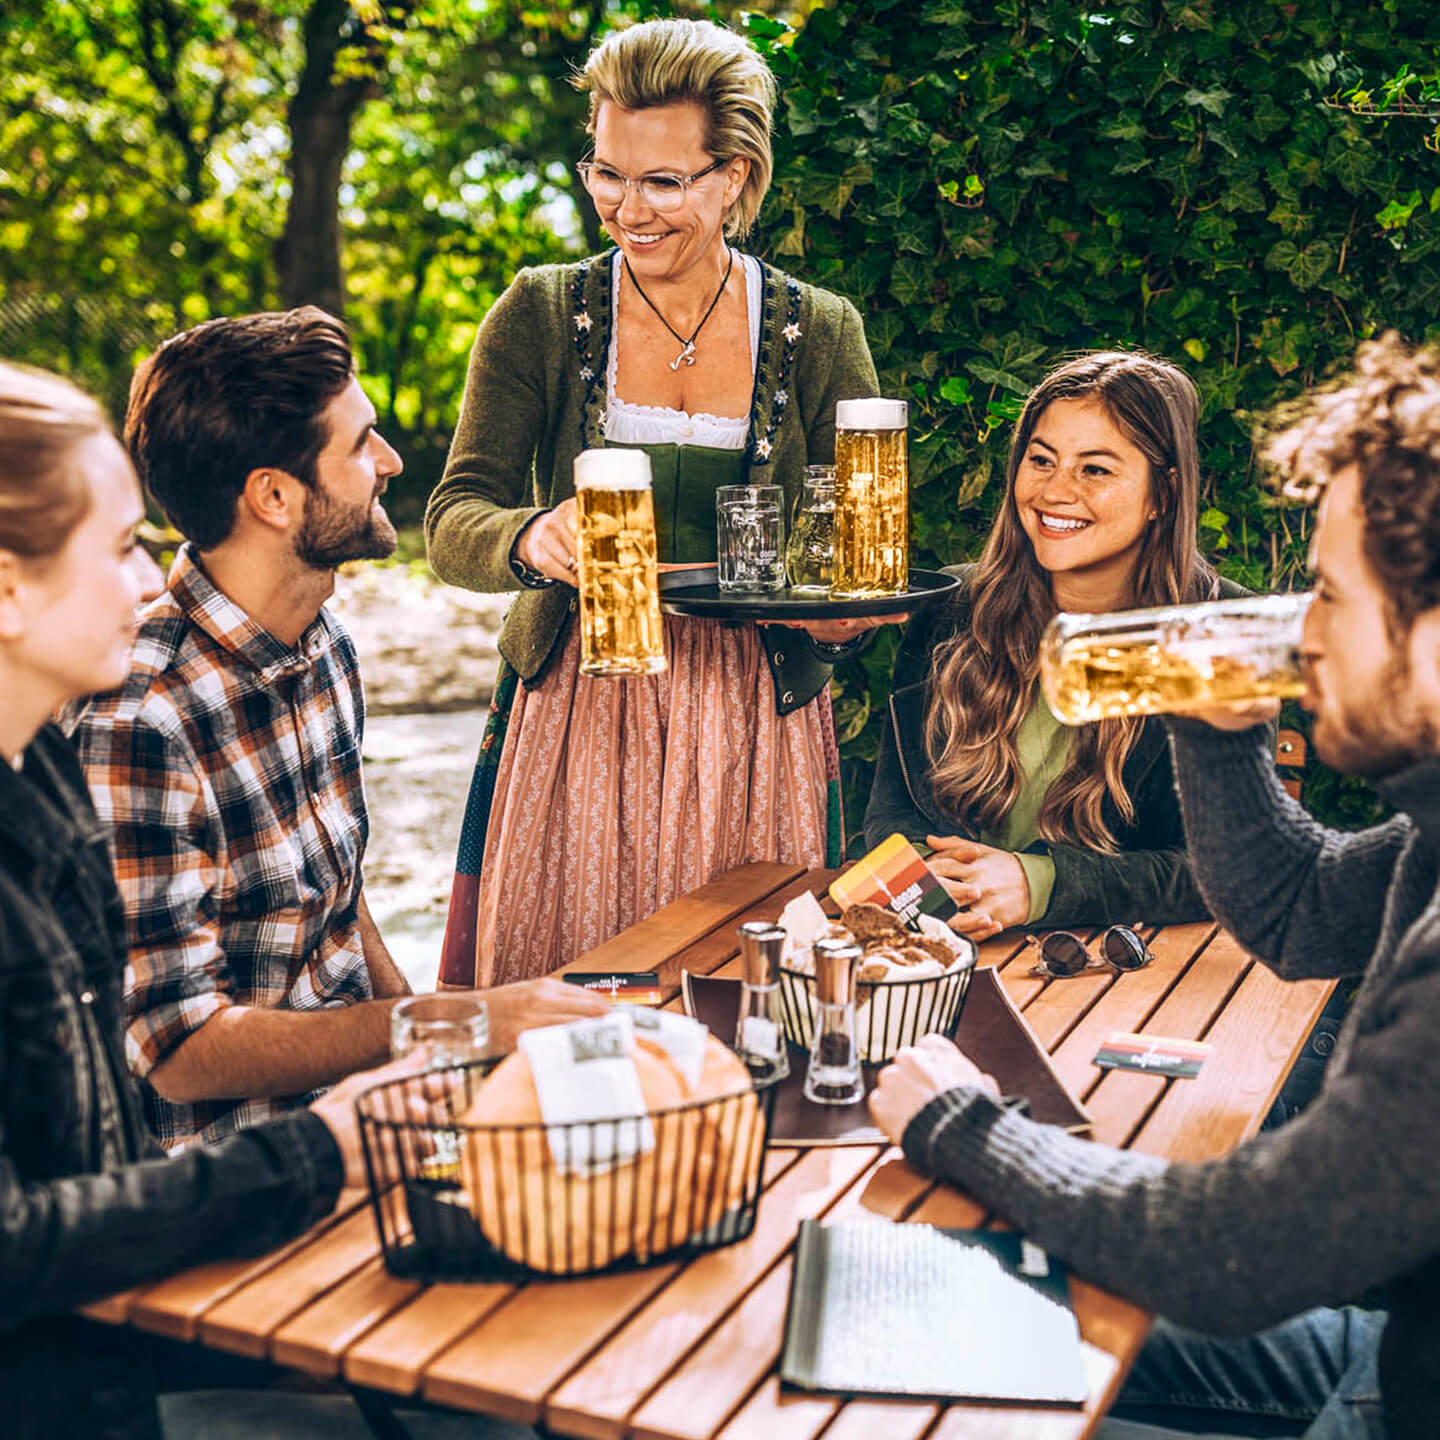 Groups drinking in the beer garden in a relaxed atmosphere